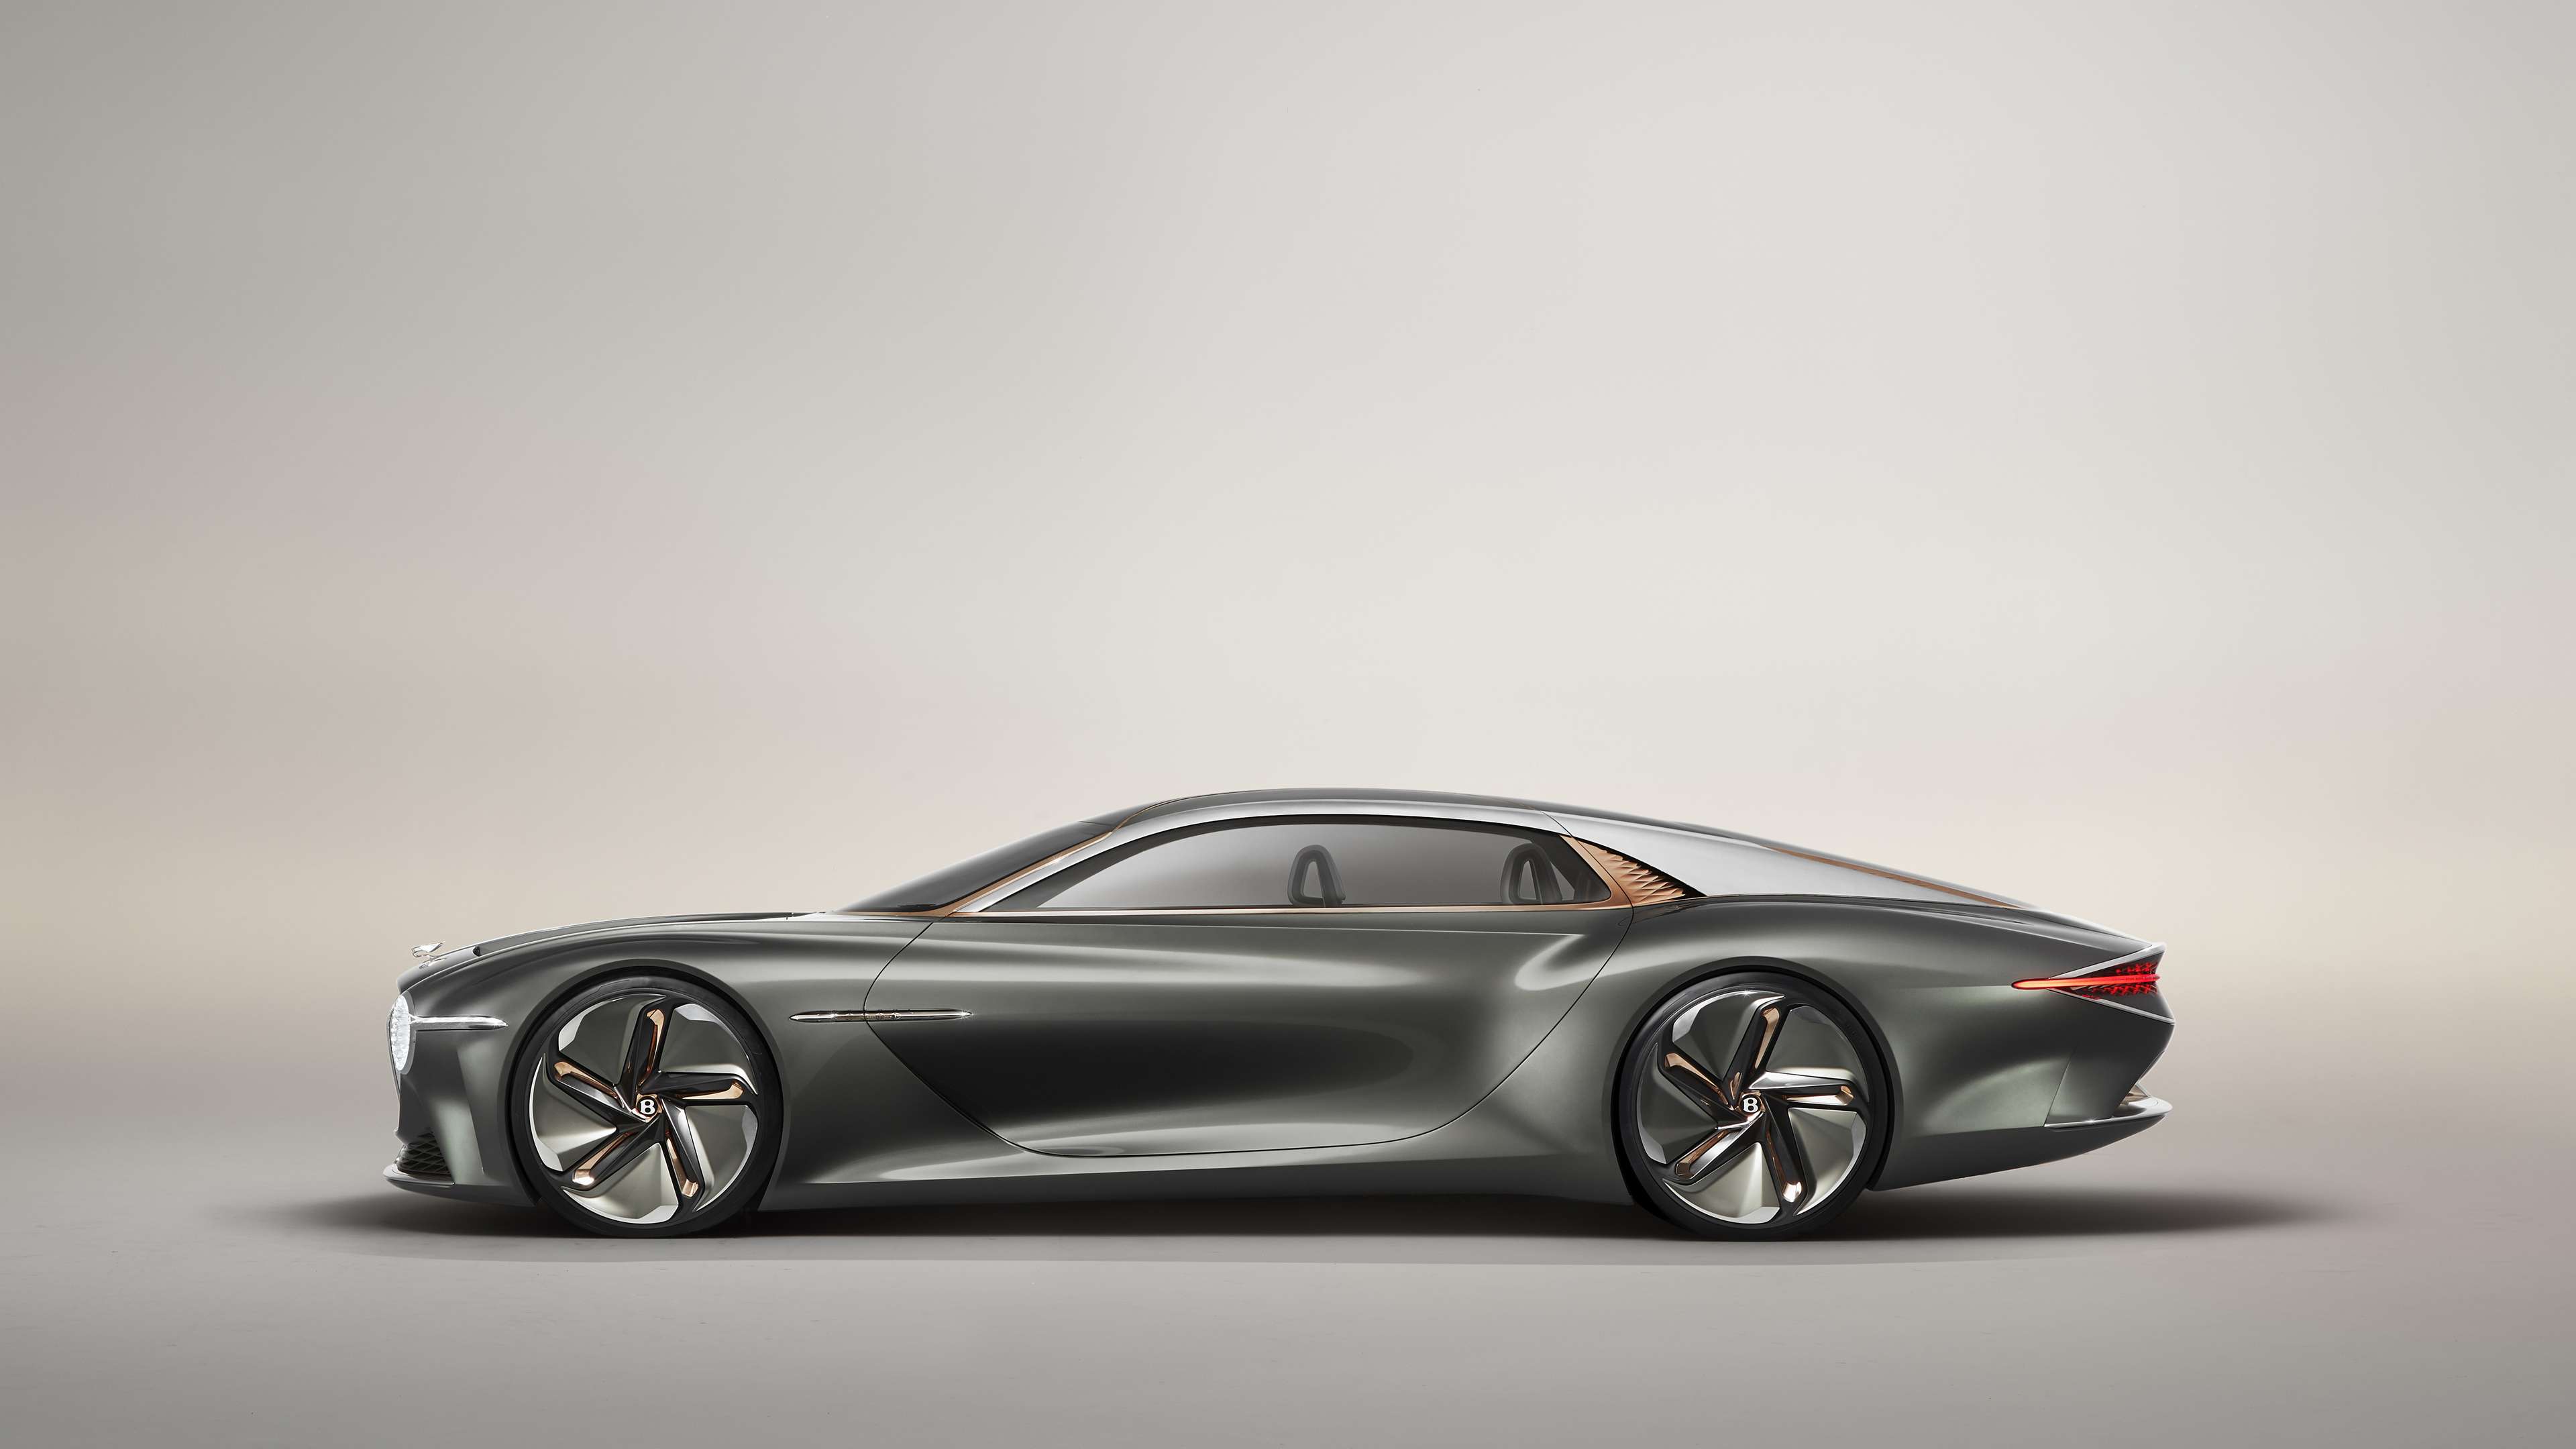 Bentley EXP 100 GT, Side view in 4K, HD wallpapers and images, Stunning automotive photography, 3840x2160 4K Desktop